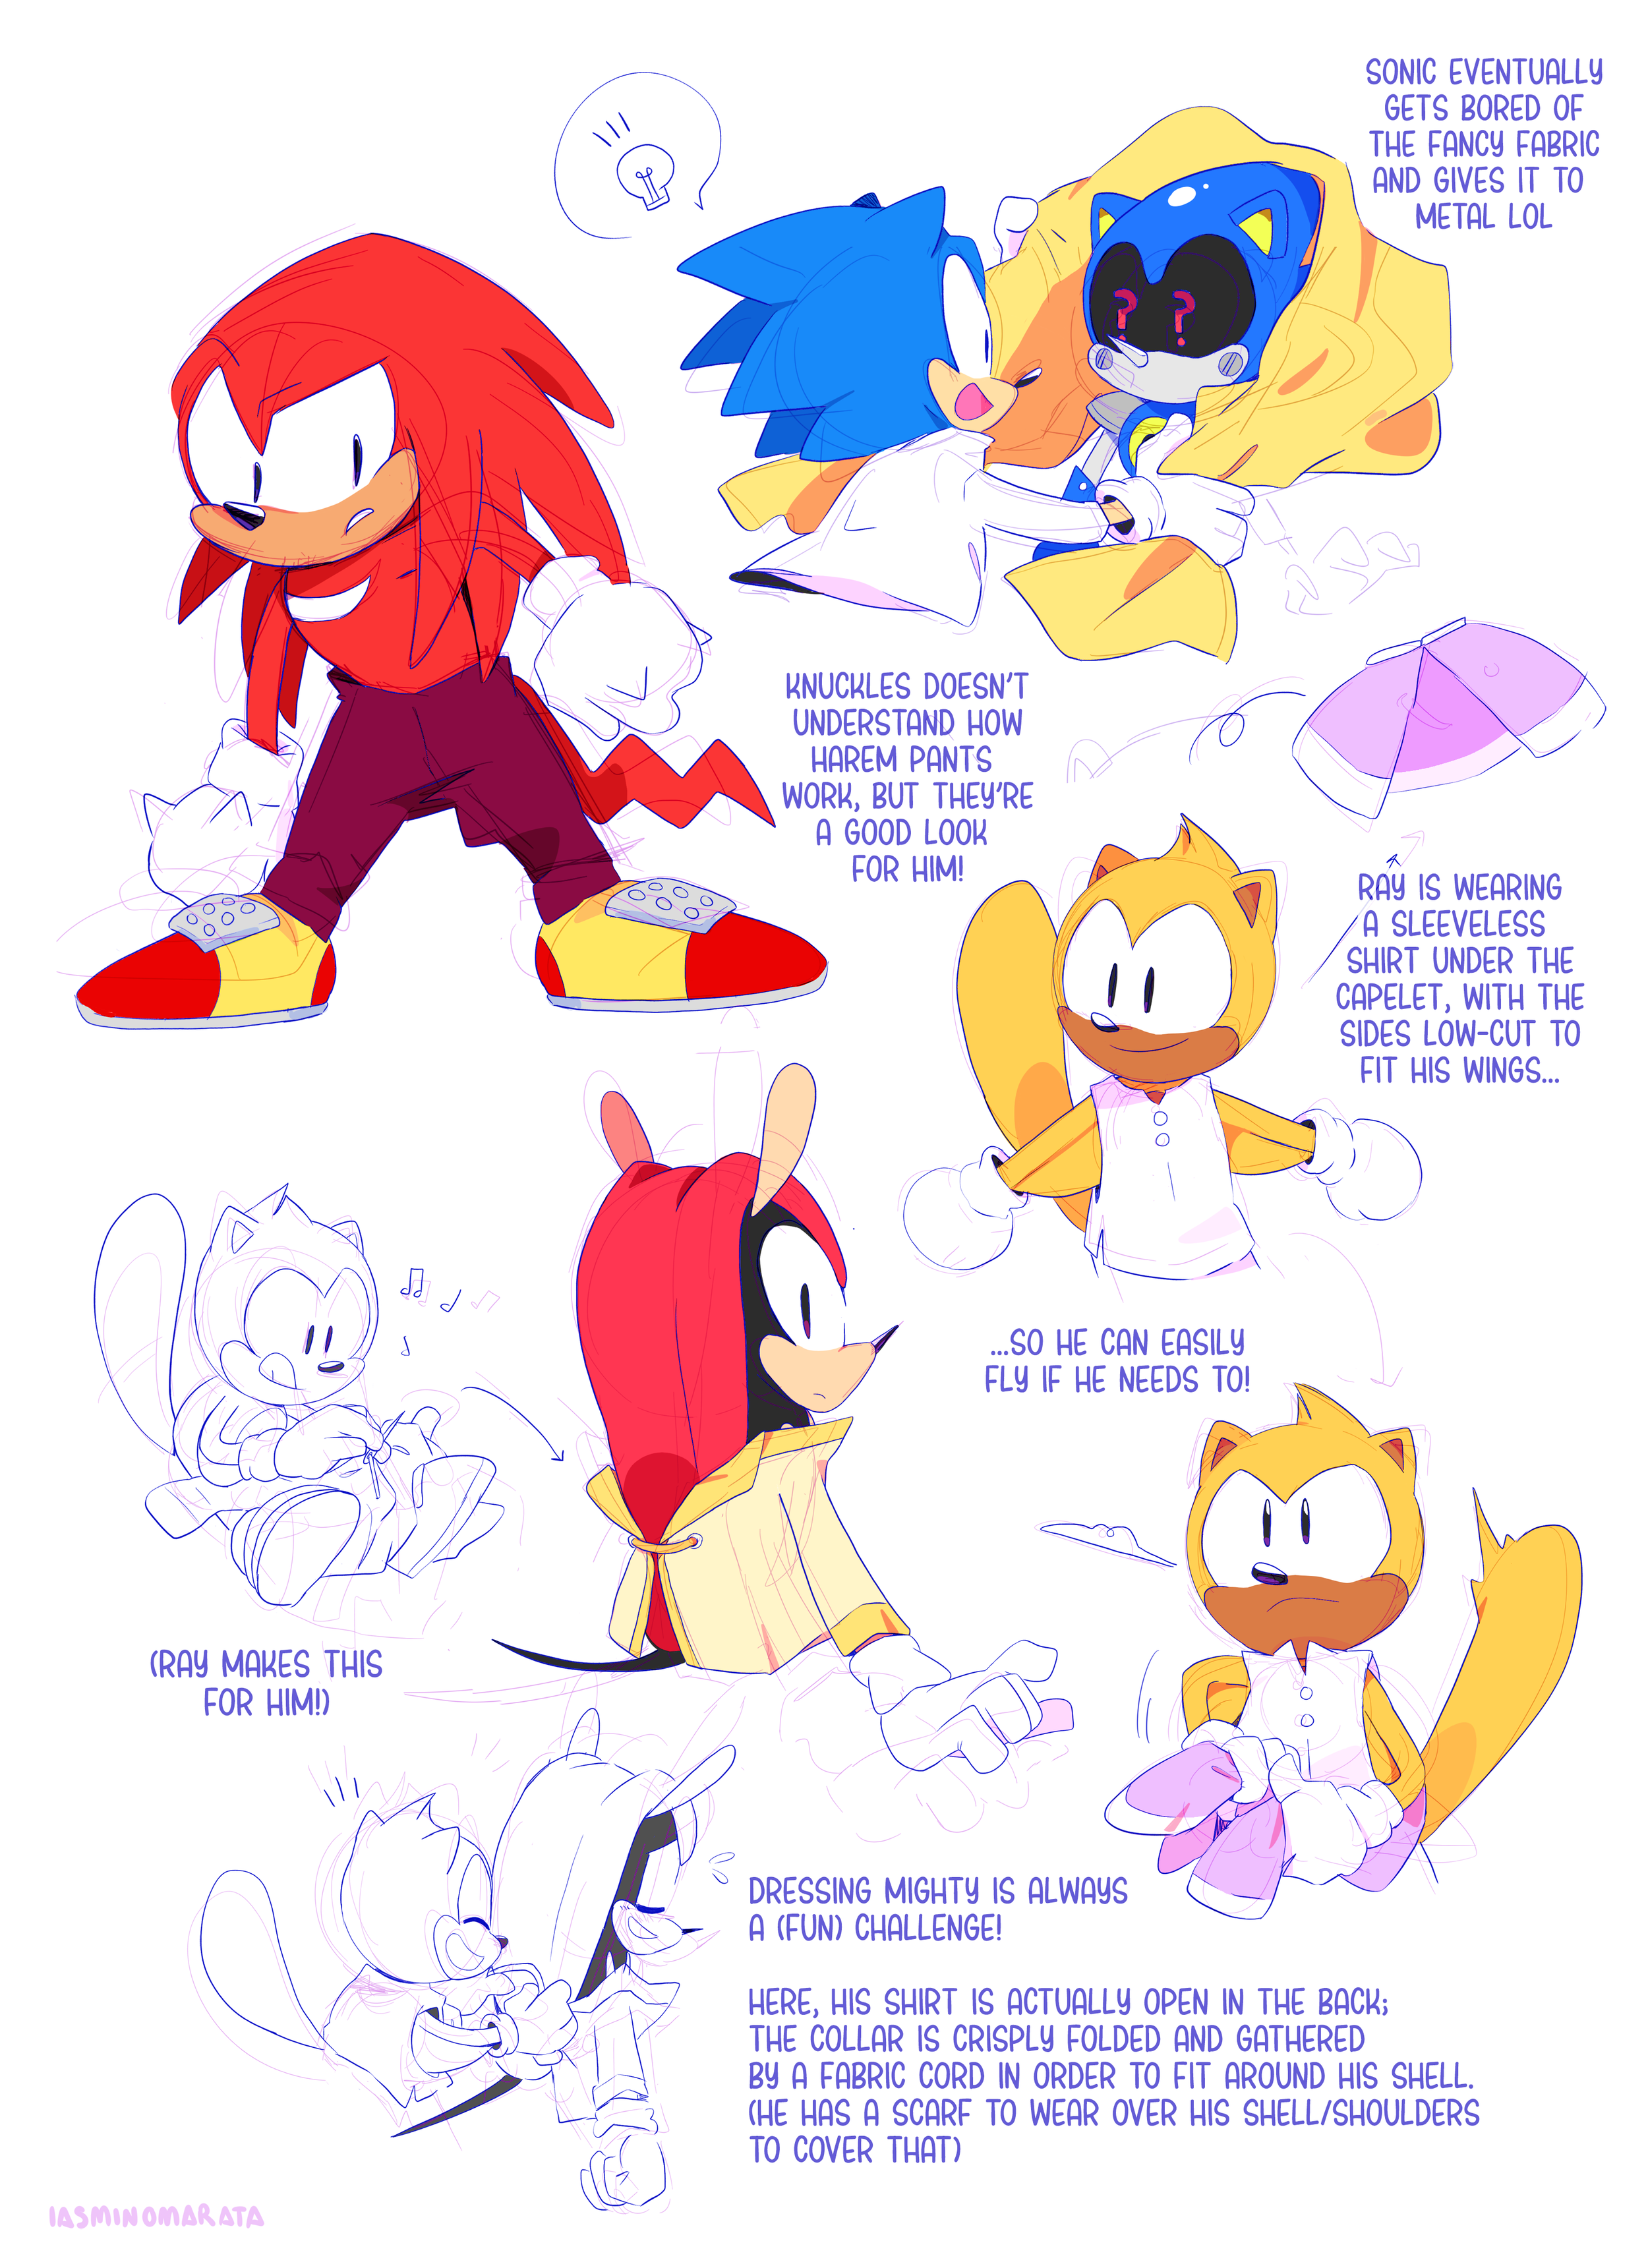 If Mighty the Armadillo was added in the Knuckles TV series, who